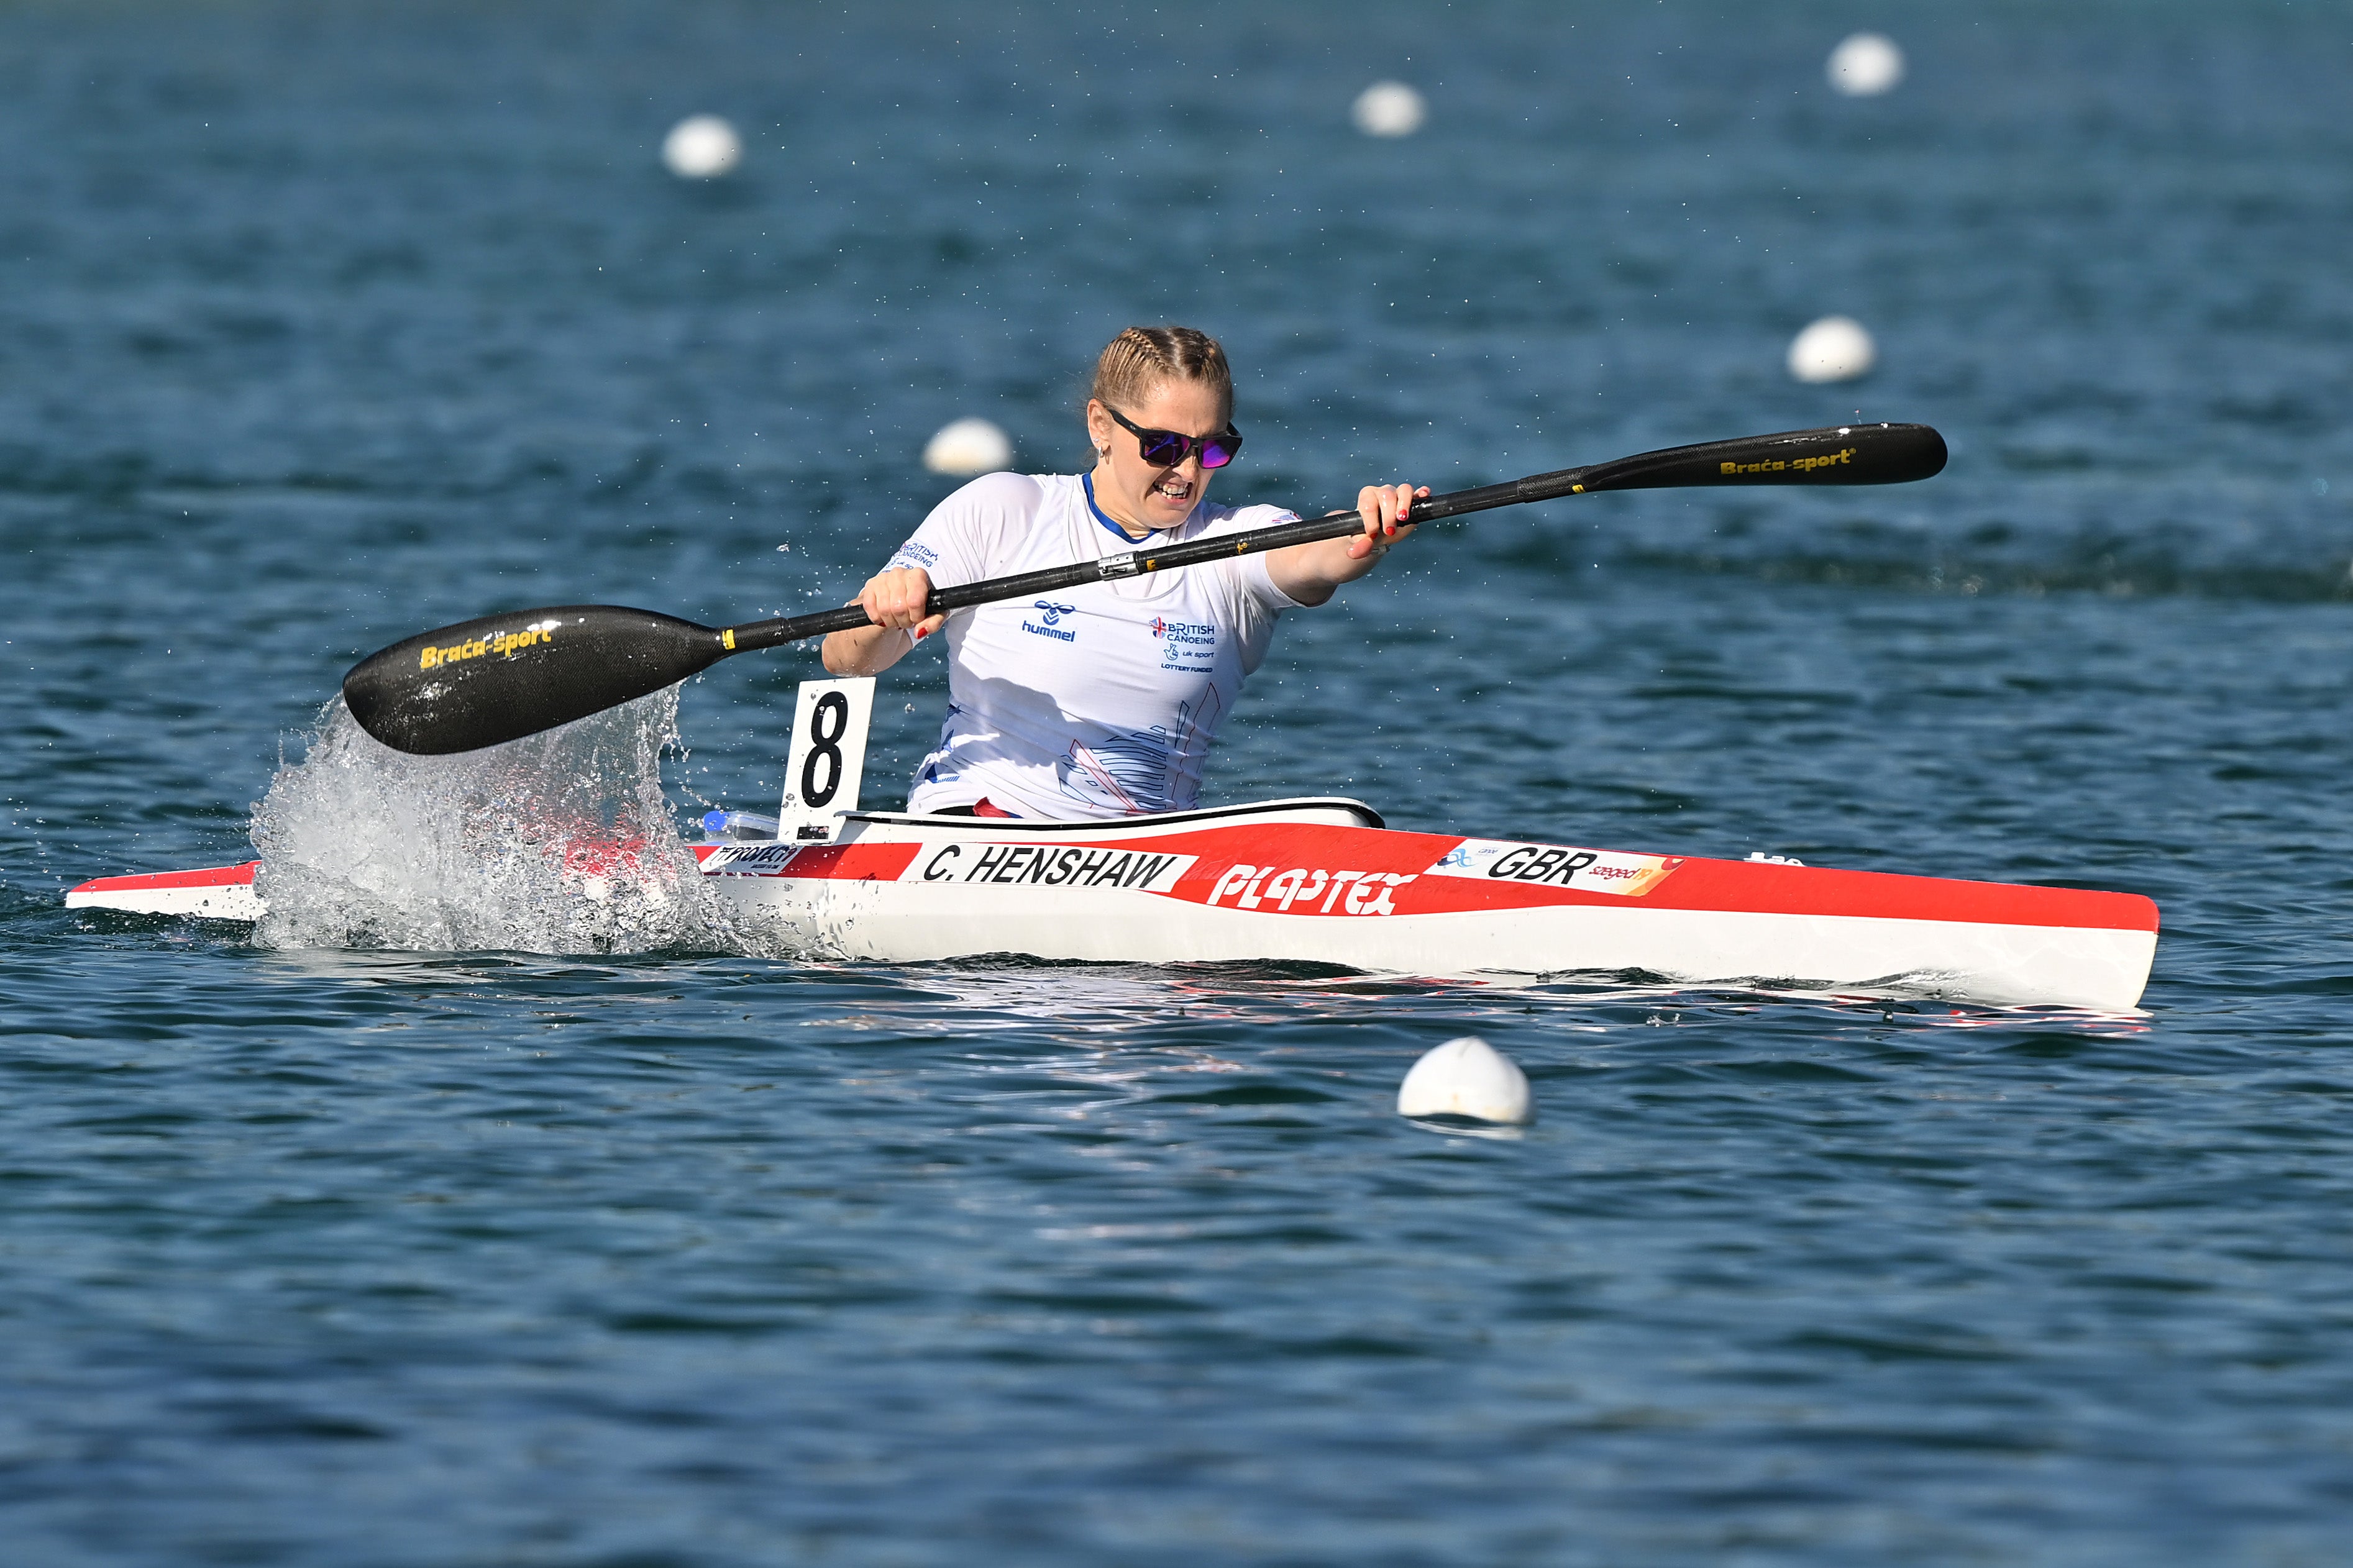 Henshaw has become an elite canoeist after her switch from swimming